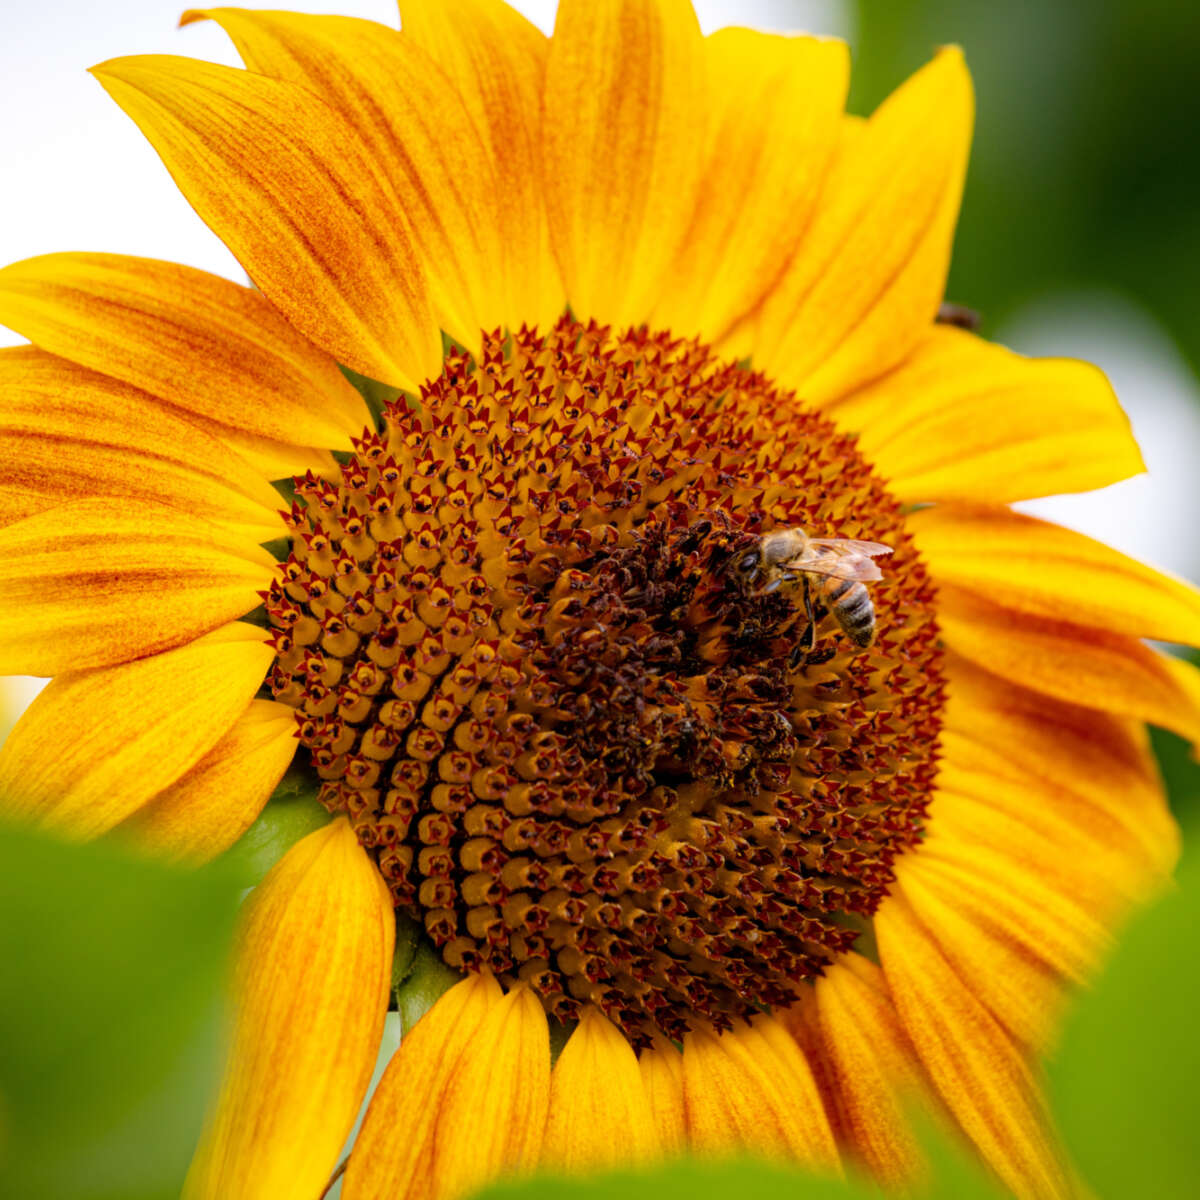 Bee hovering by a sunflower